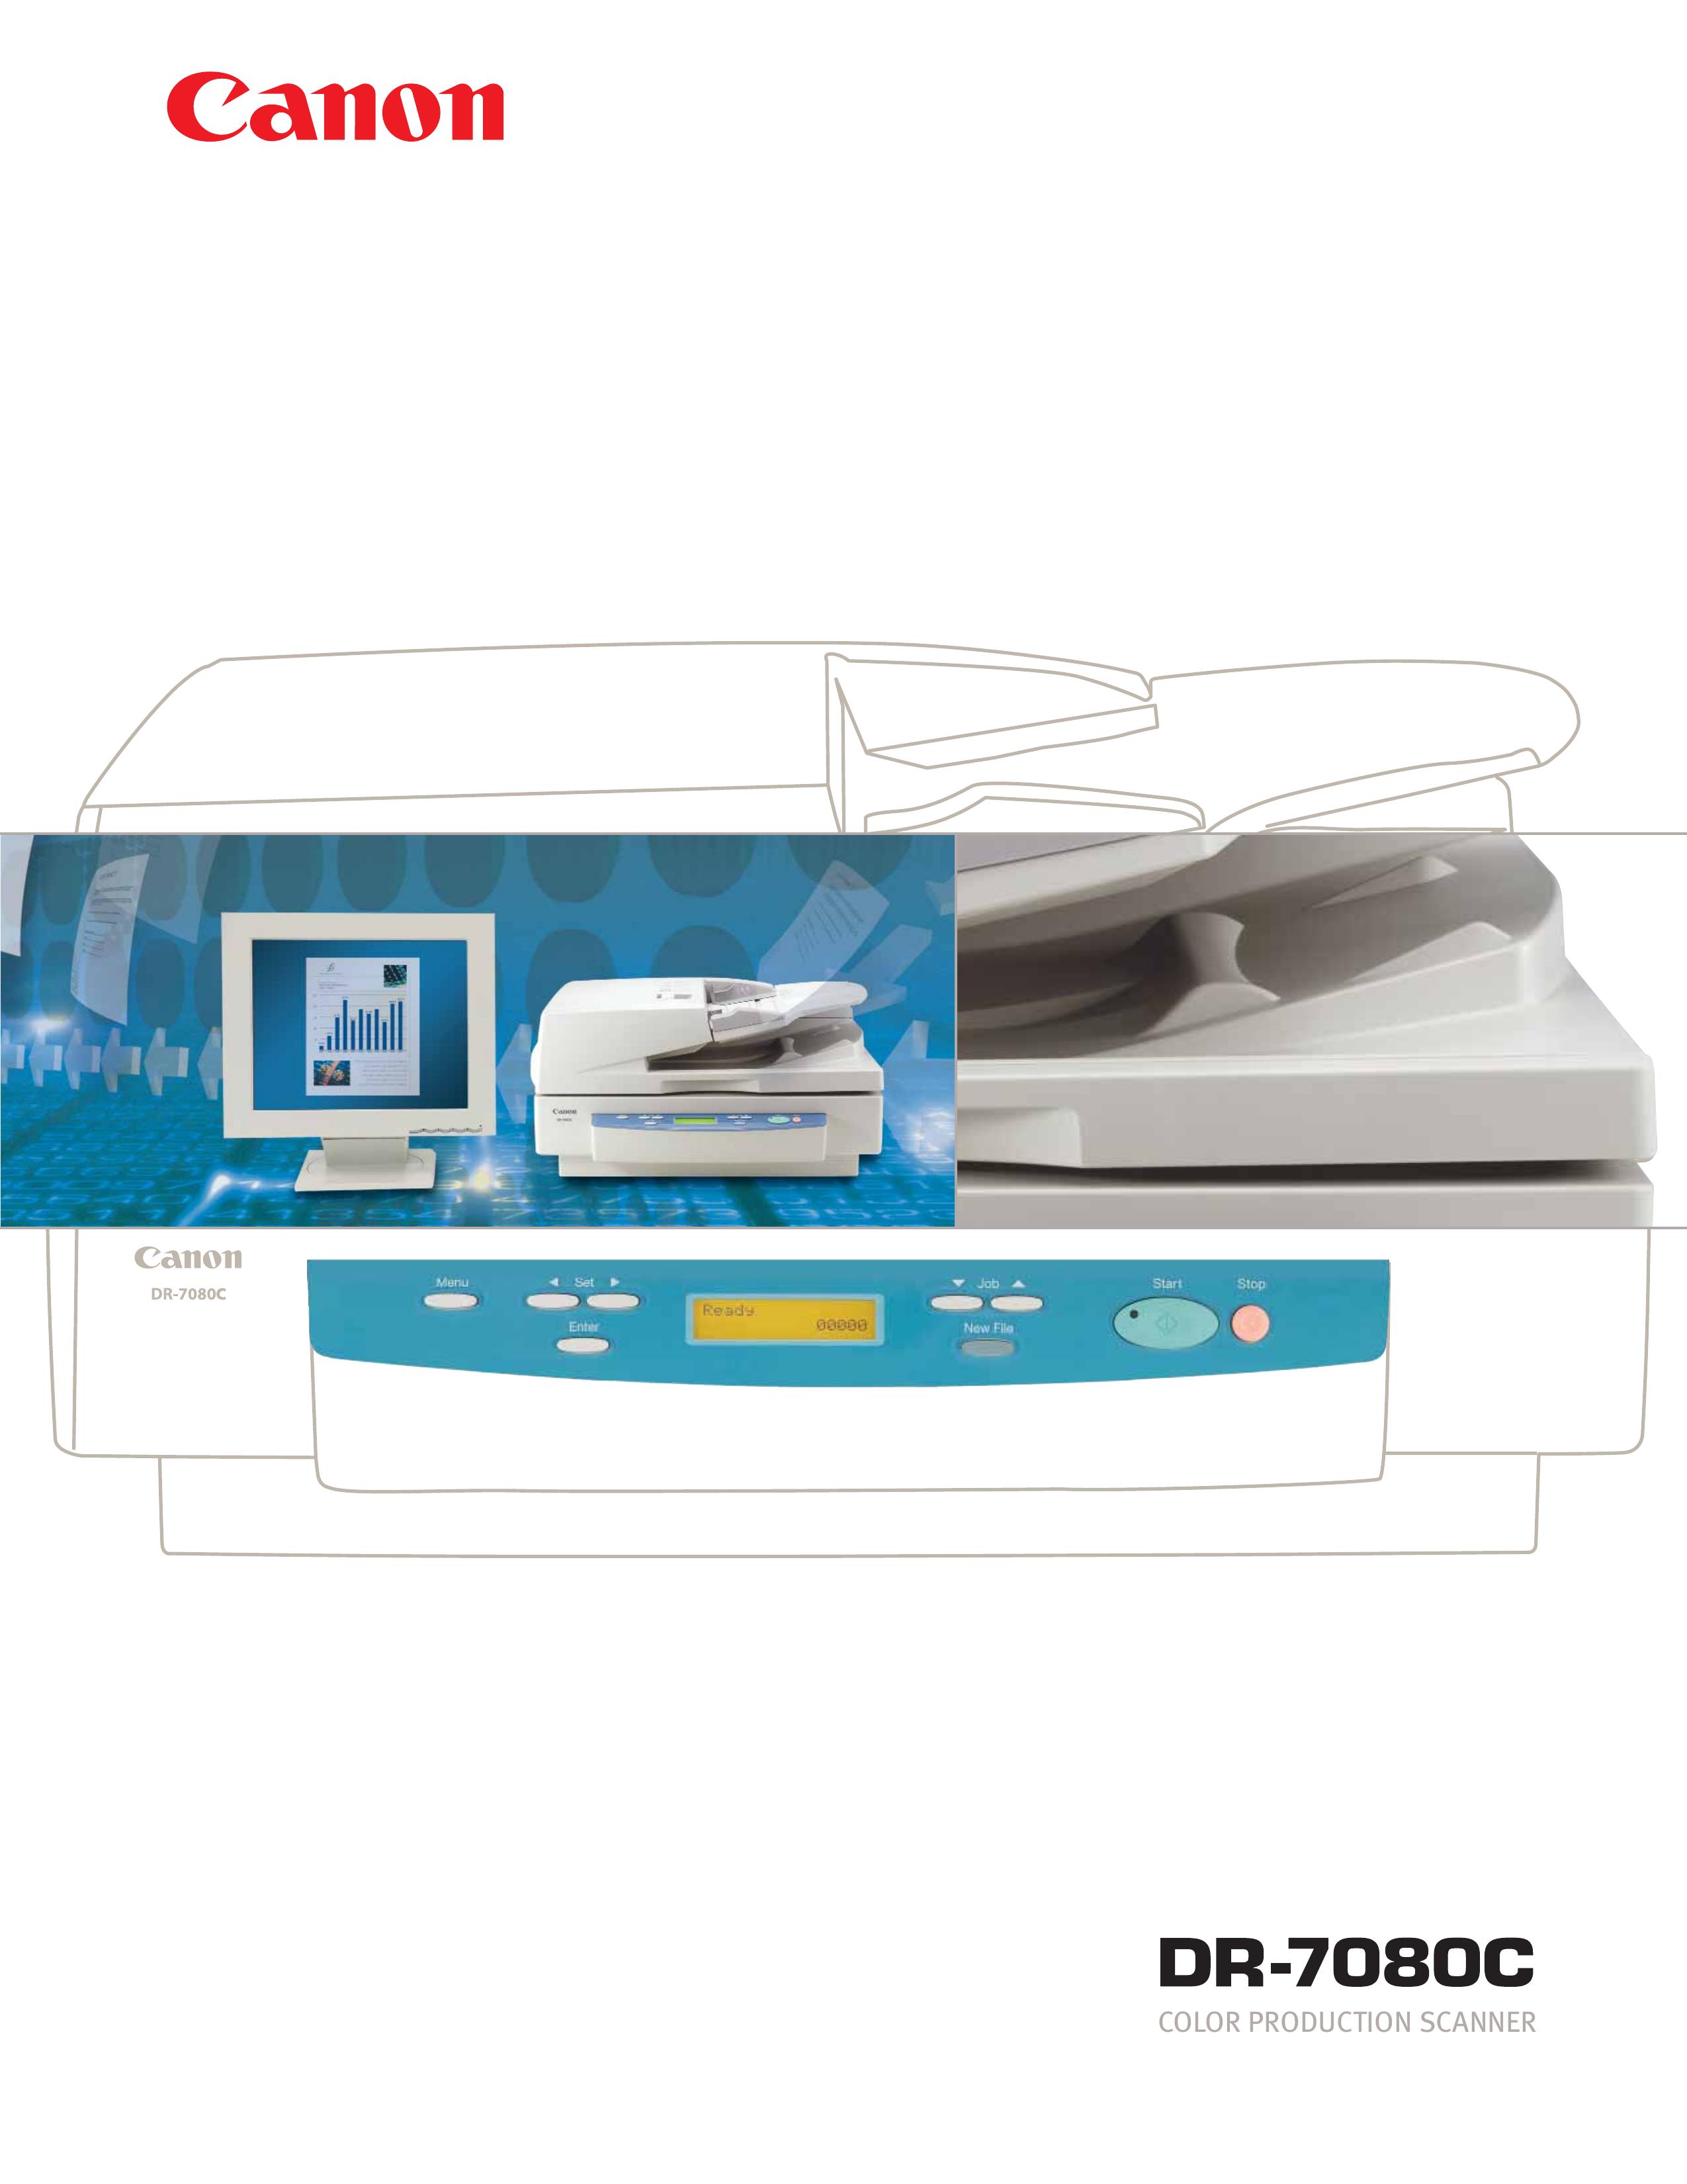 Canon DR-7080C Photo Scanner User Manual